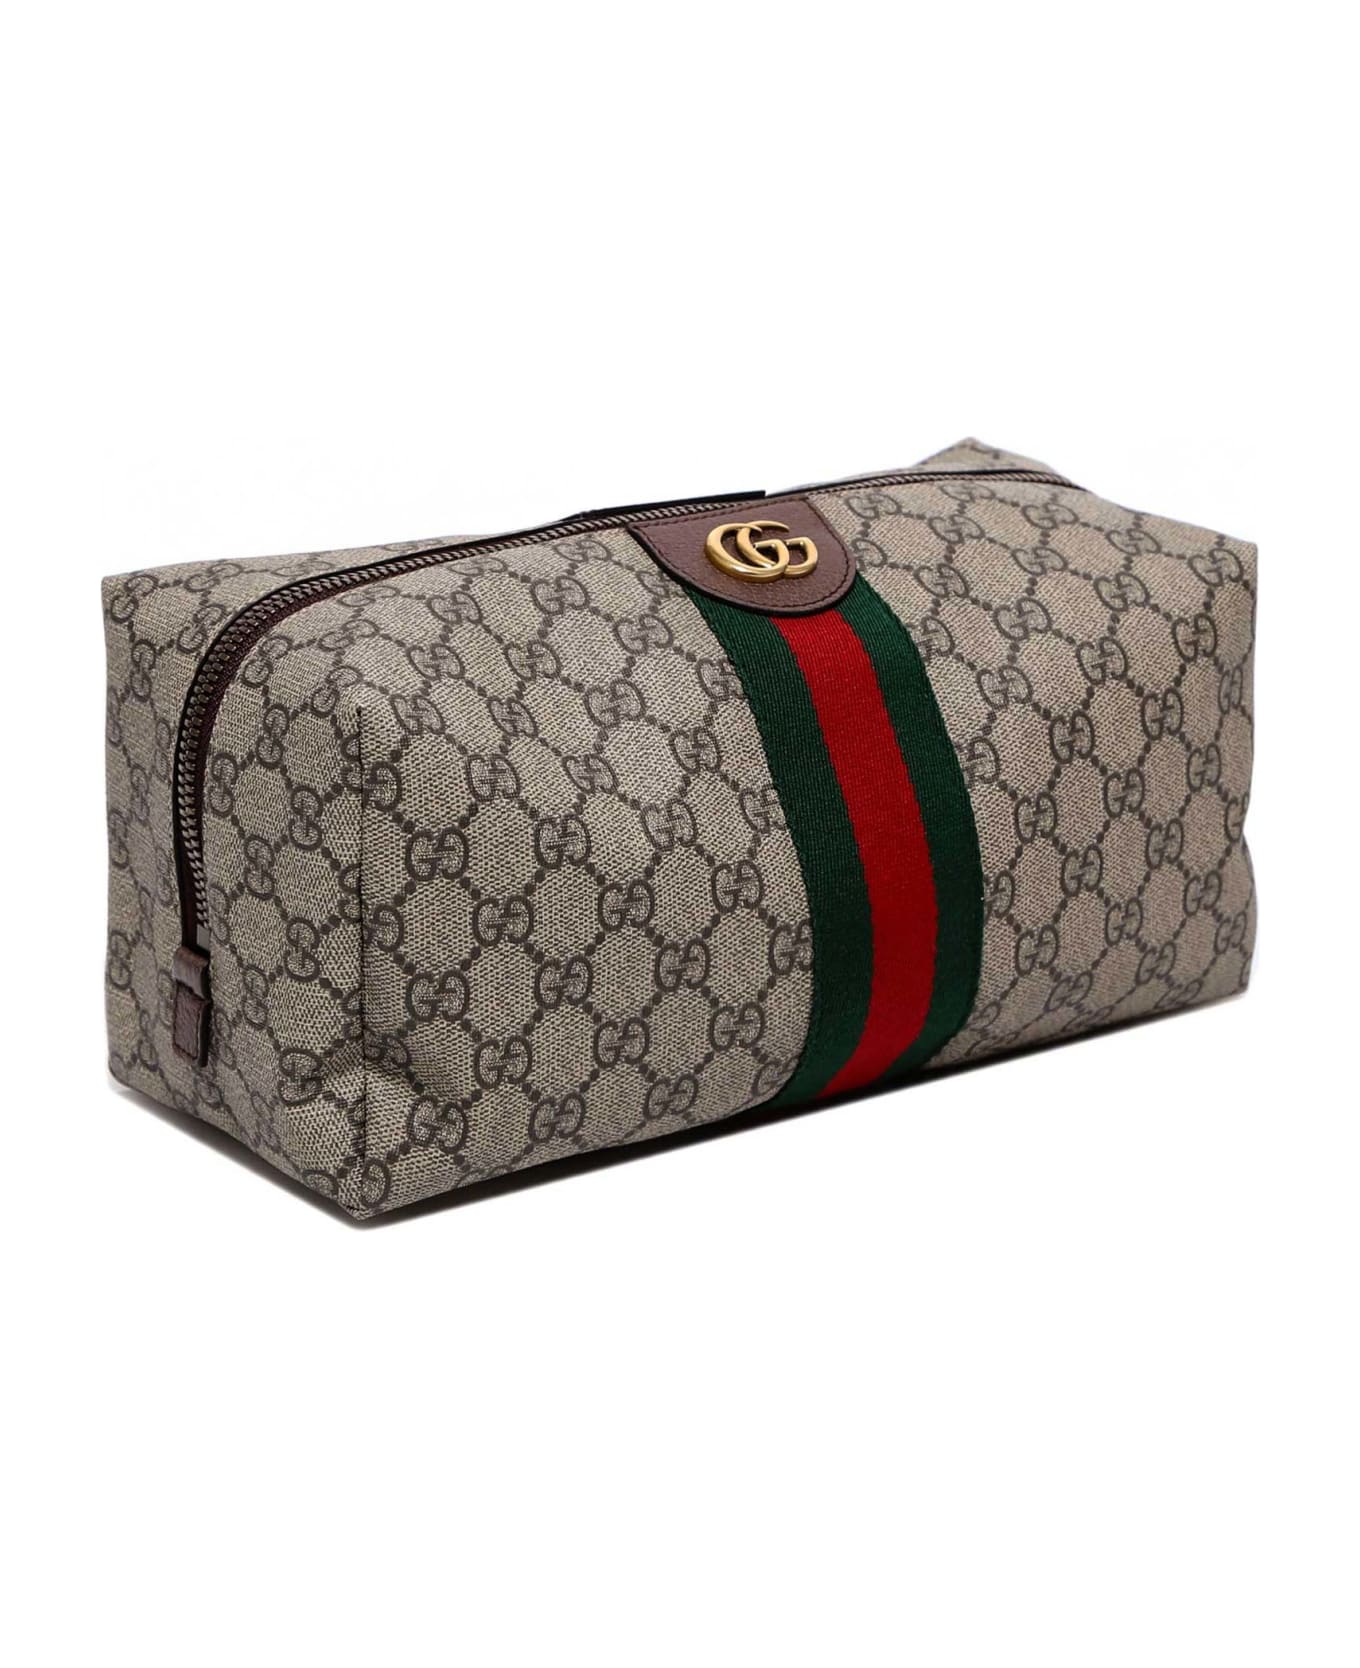 Gucci L Toyl.c. M Ophidia Gg Sup So. - Beige トラベルバッグ